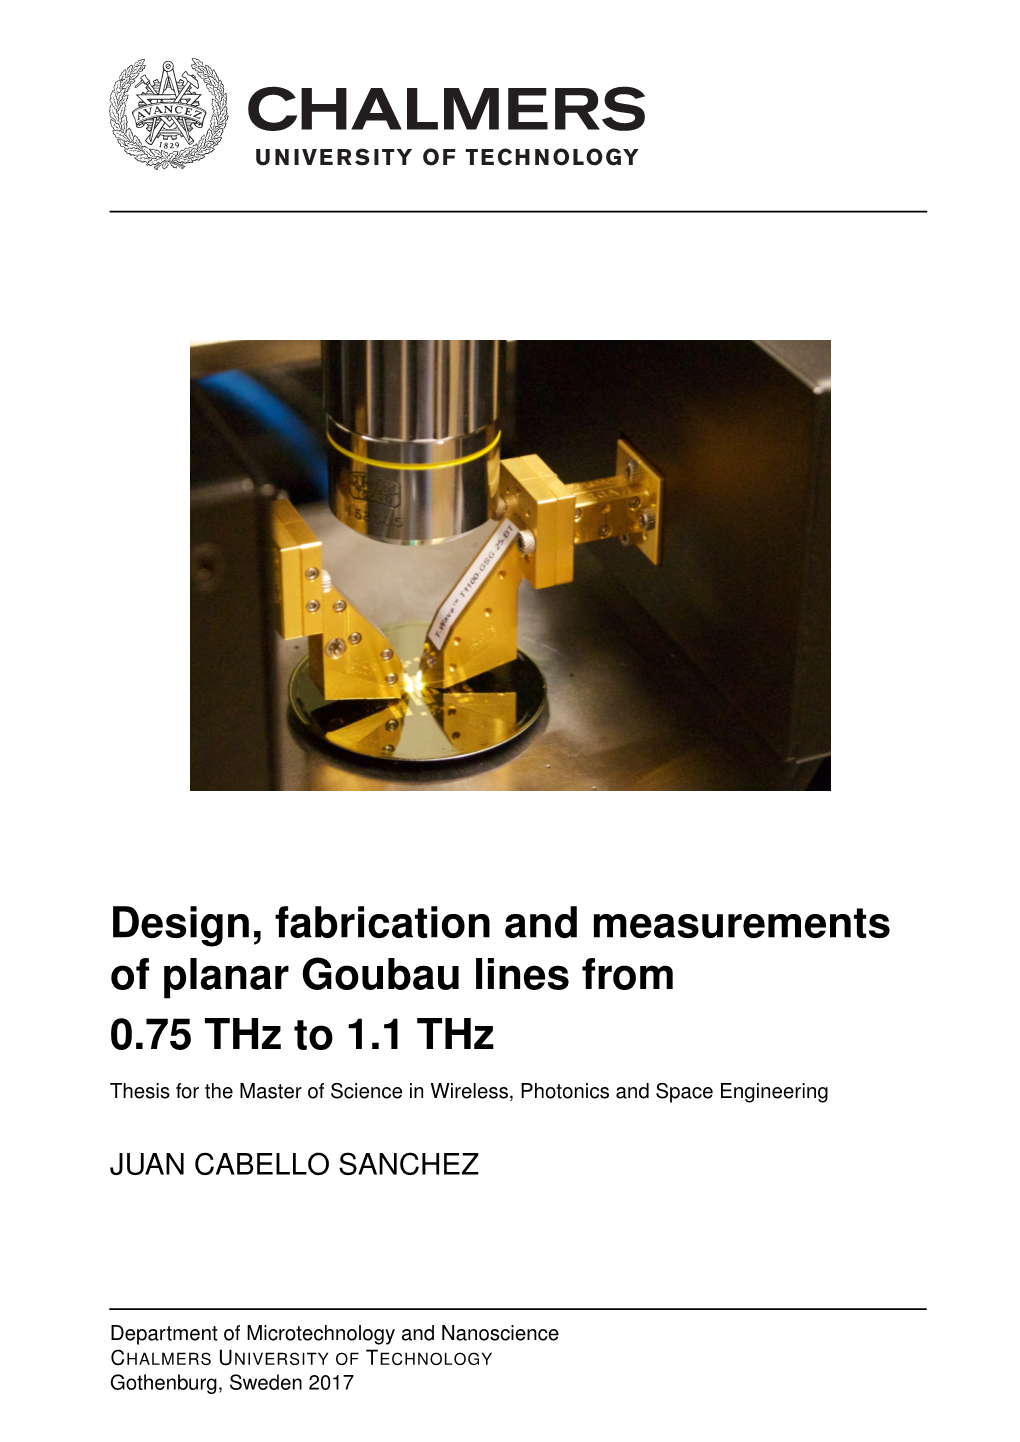 Design, Fabrication and Measurements of Planar Goubau Lines from 0.75 Thz to 1.1 Thz